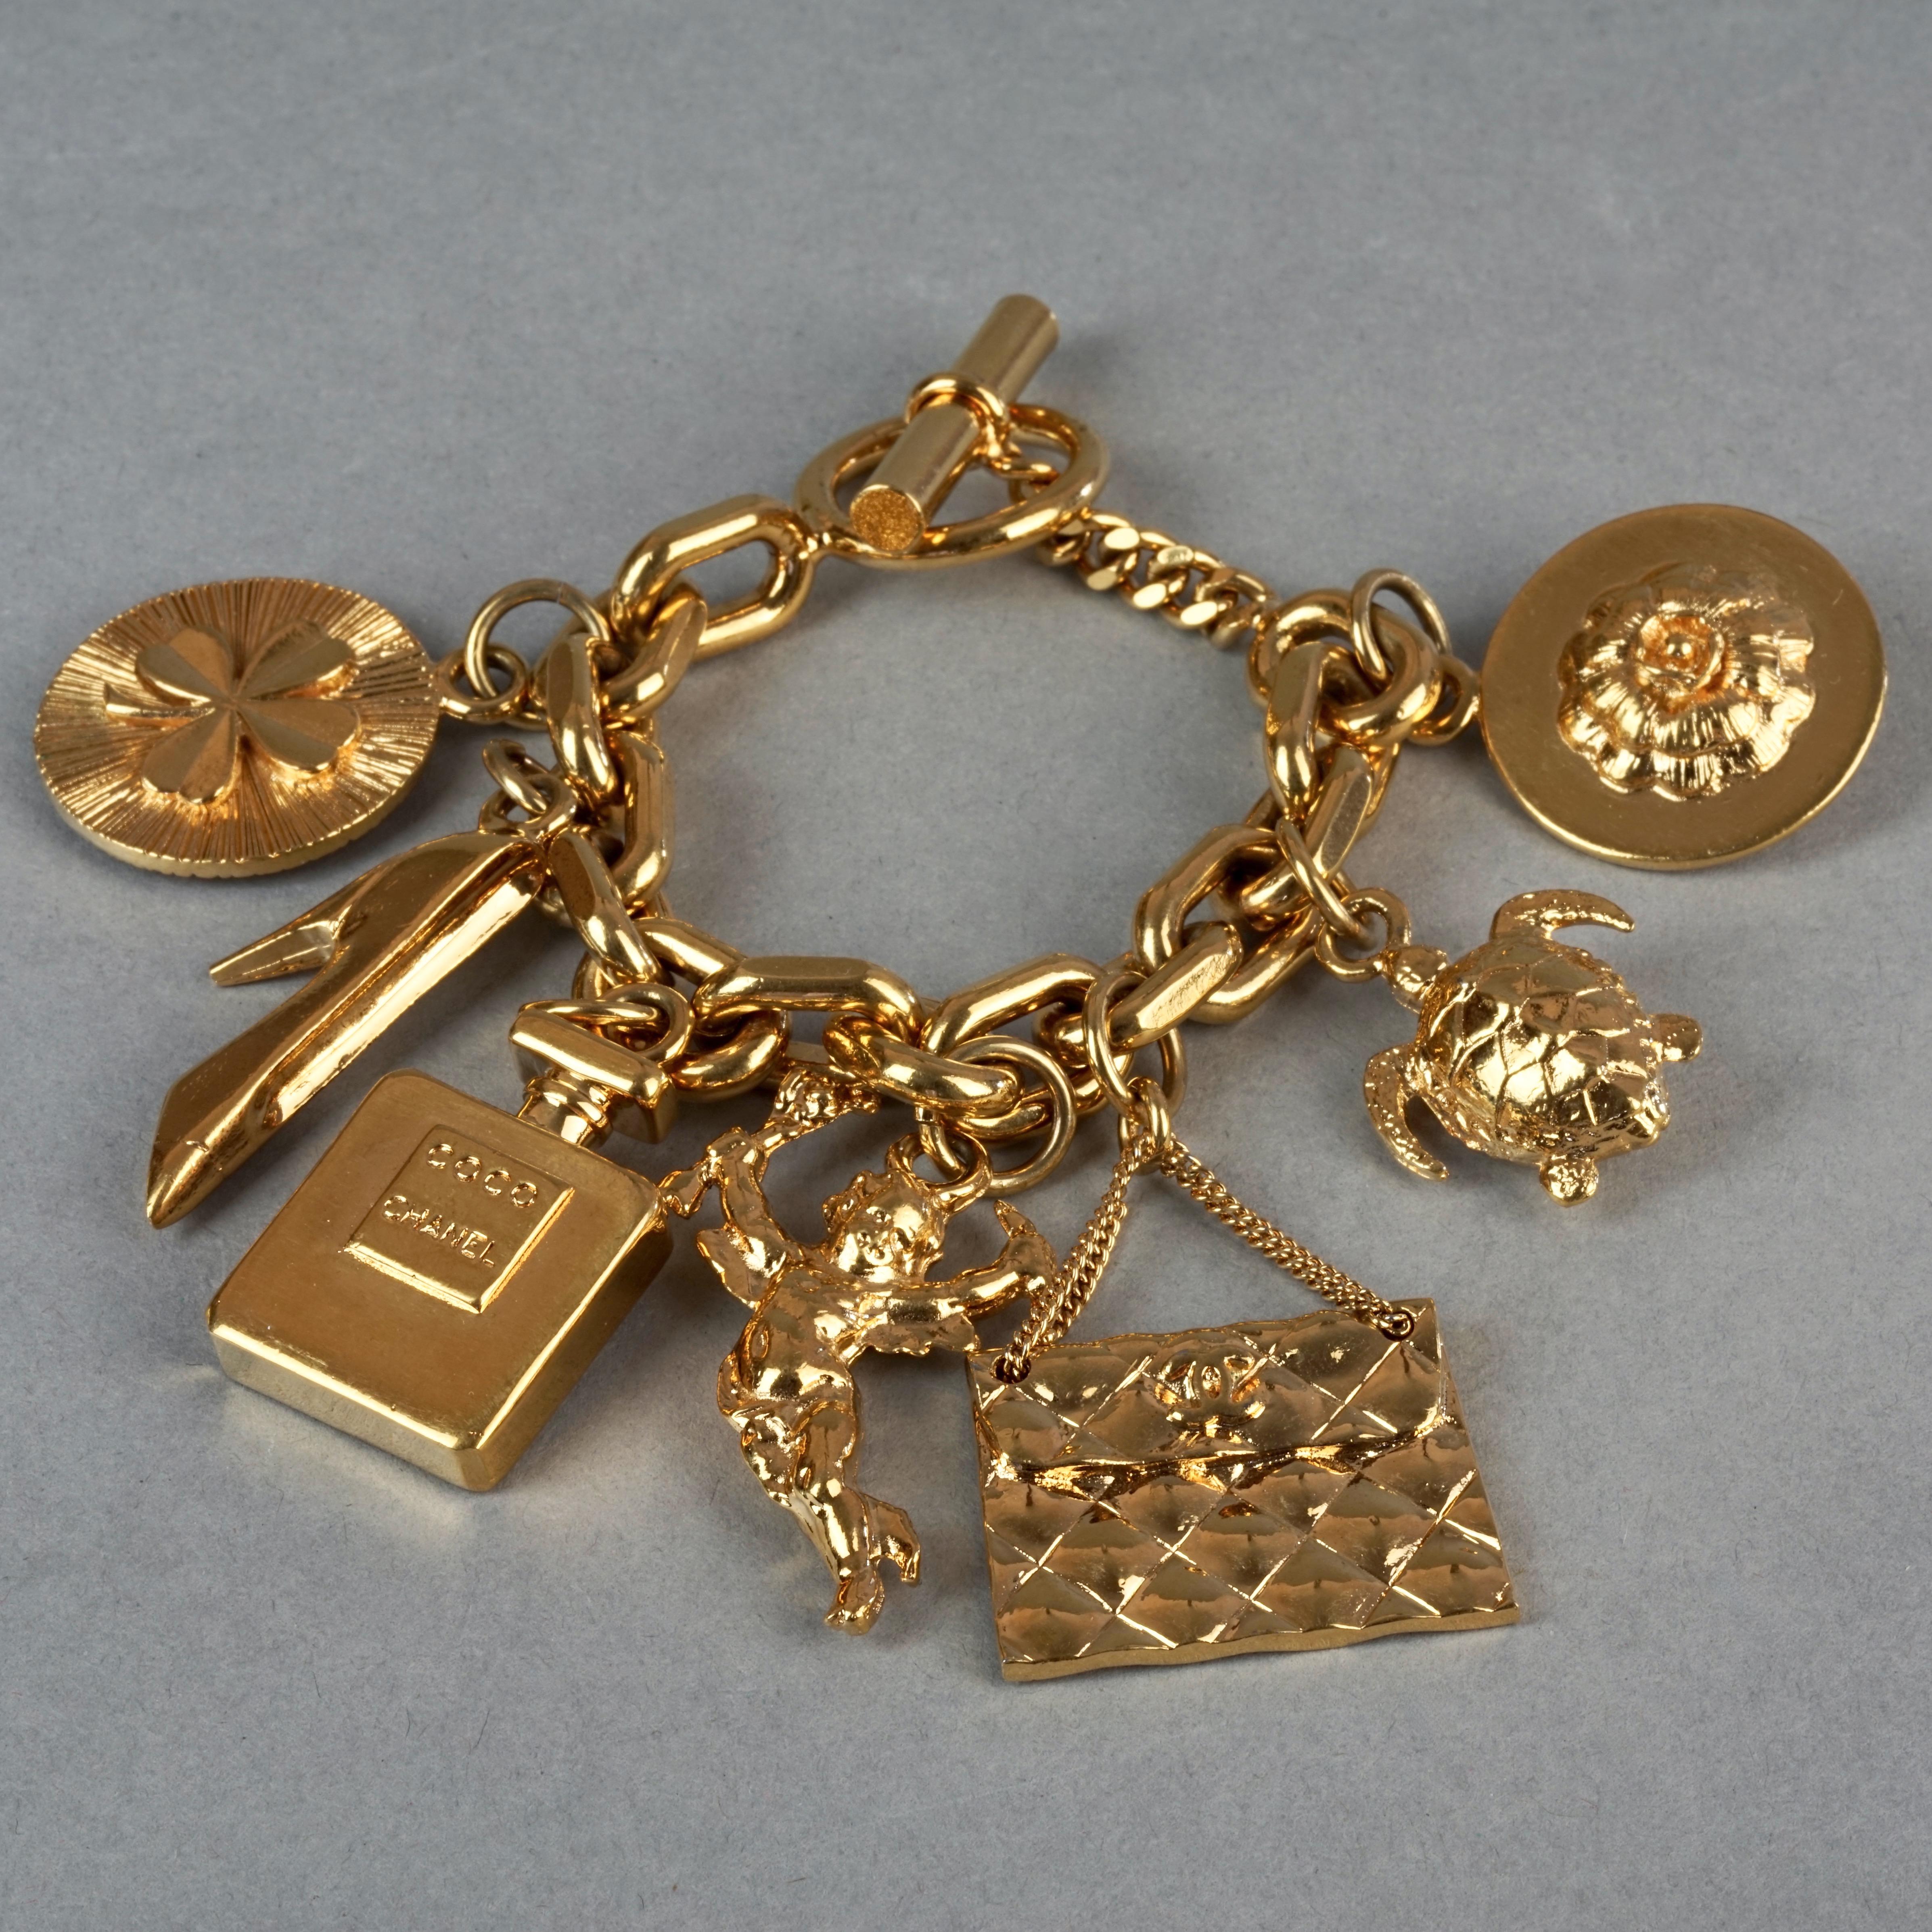 Vintage Iconic CHANEL Charms Chunky Bracelet In Excellent Condition For Sale In Kingersheim, Alsace